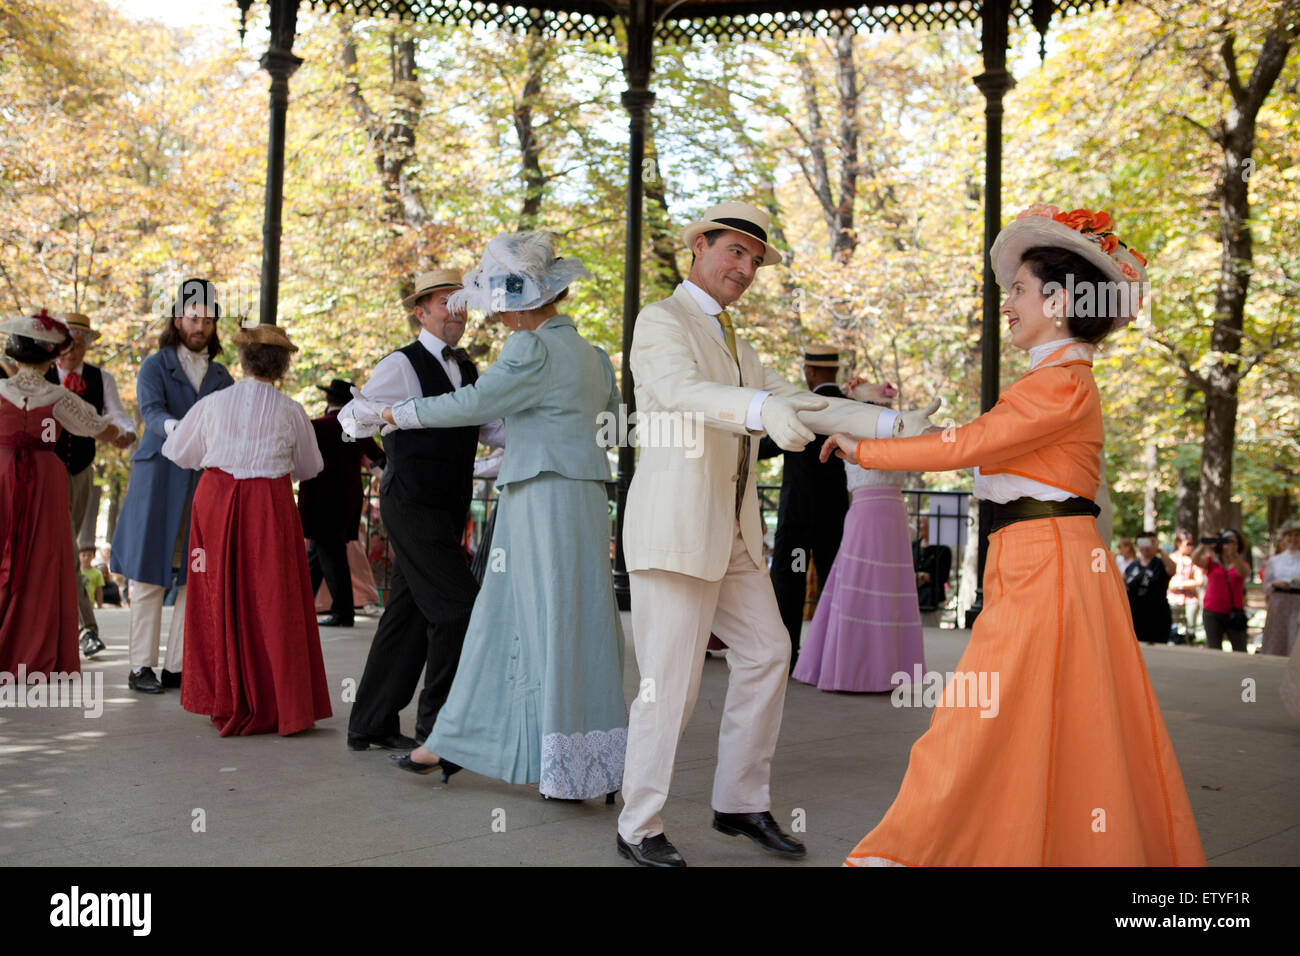 Old fashioned dance at the Jardins de Luxembourg in Paris. Afternoon show for tourists. France Stock Photo